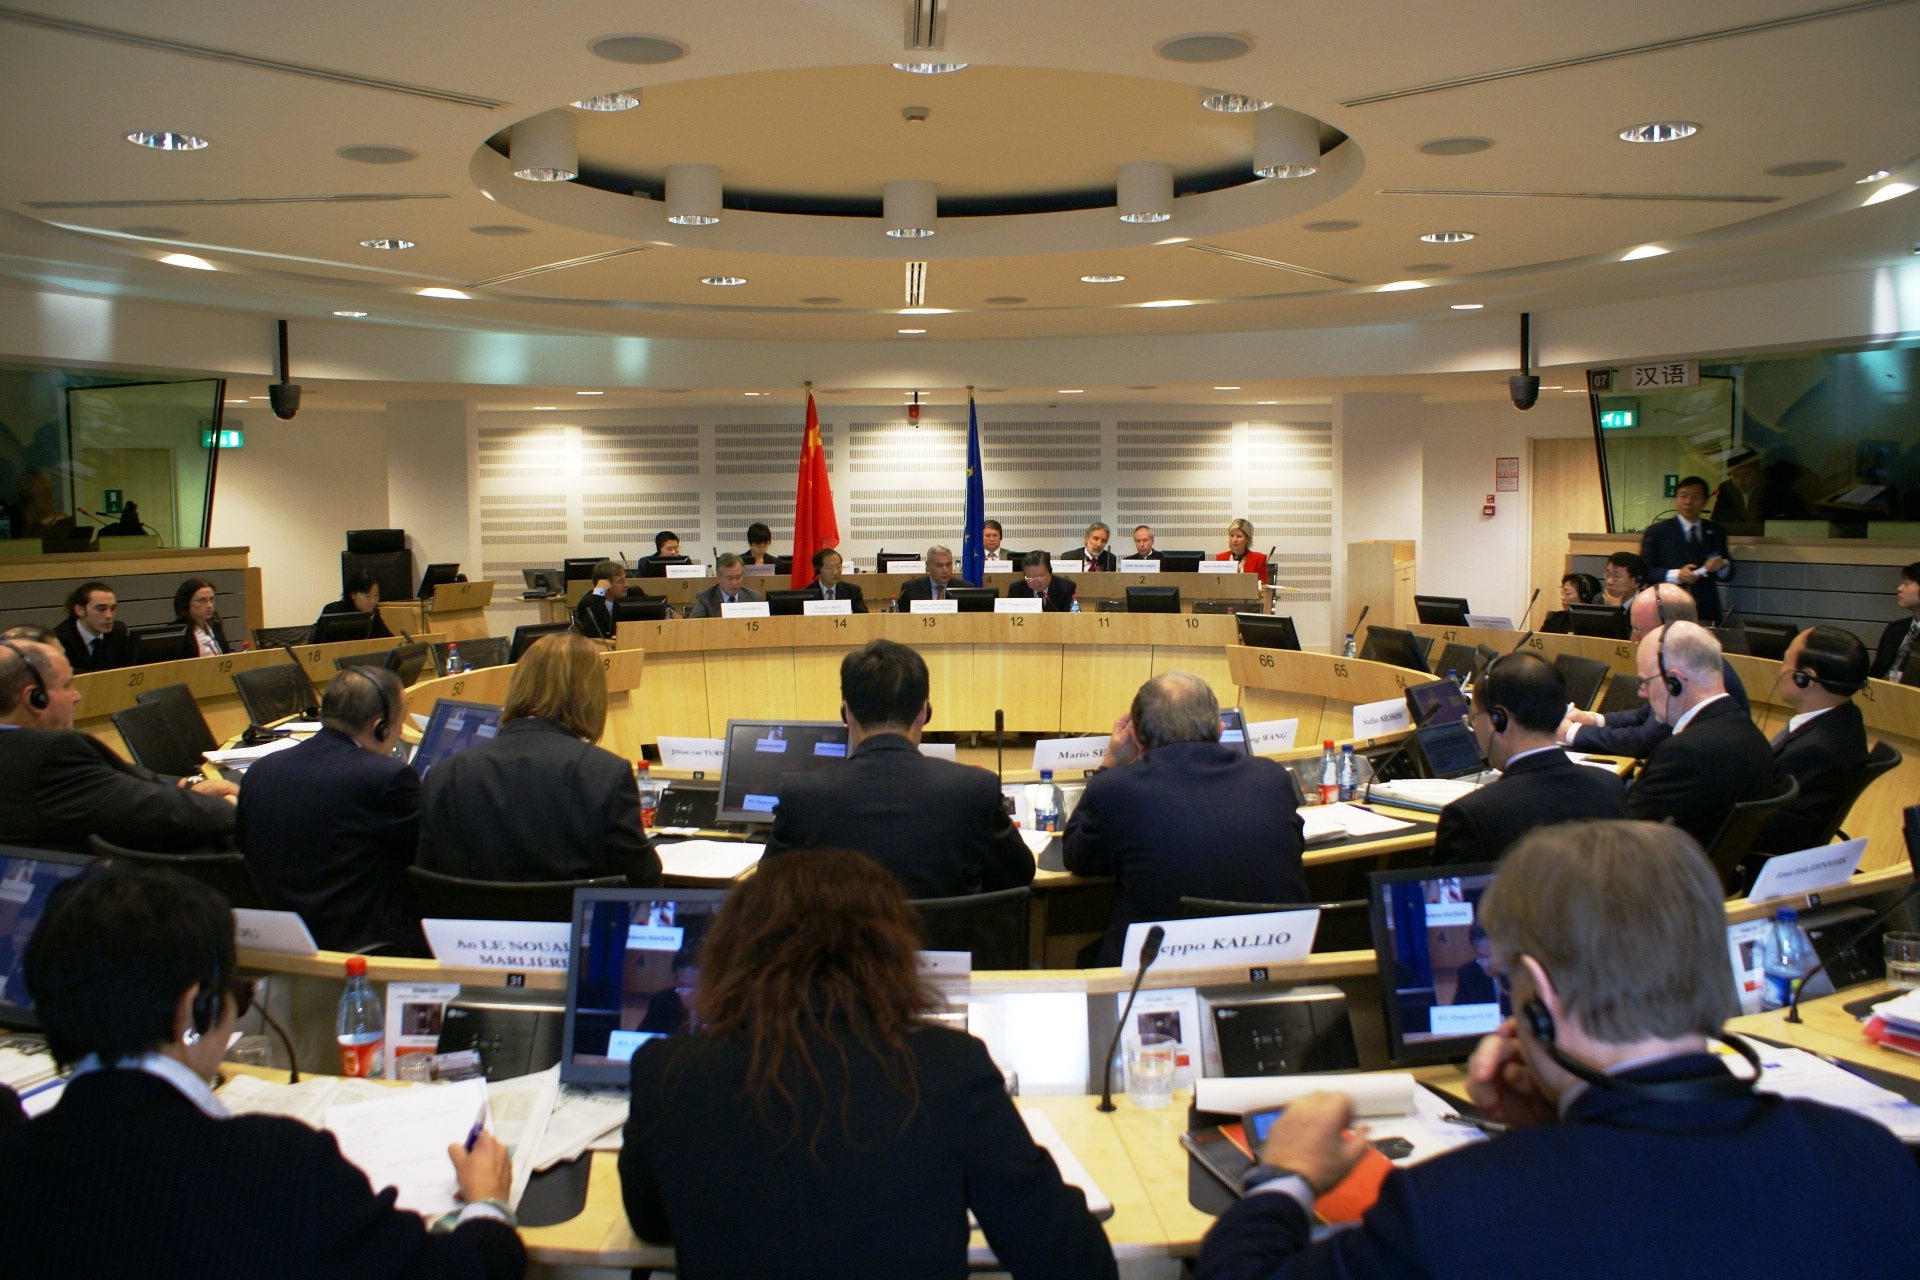 Pictures of the 2nd EU-China Round Table